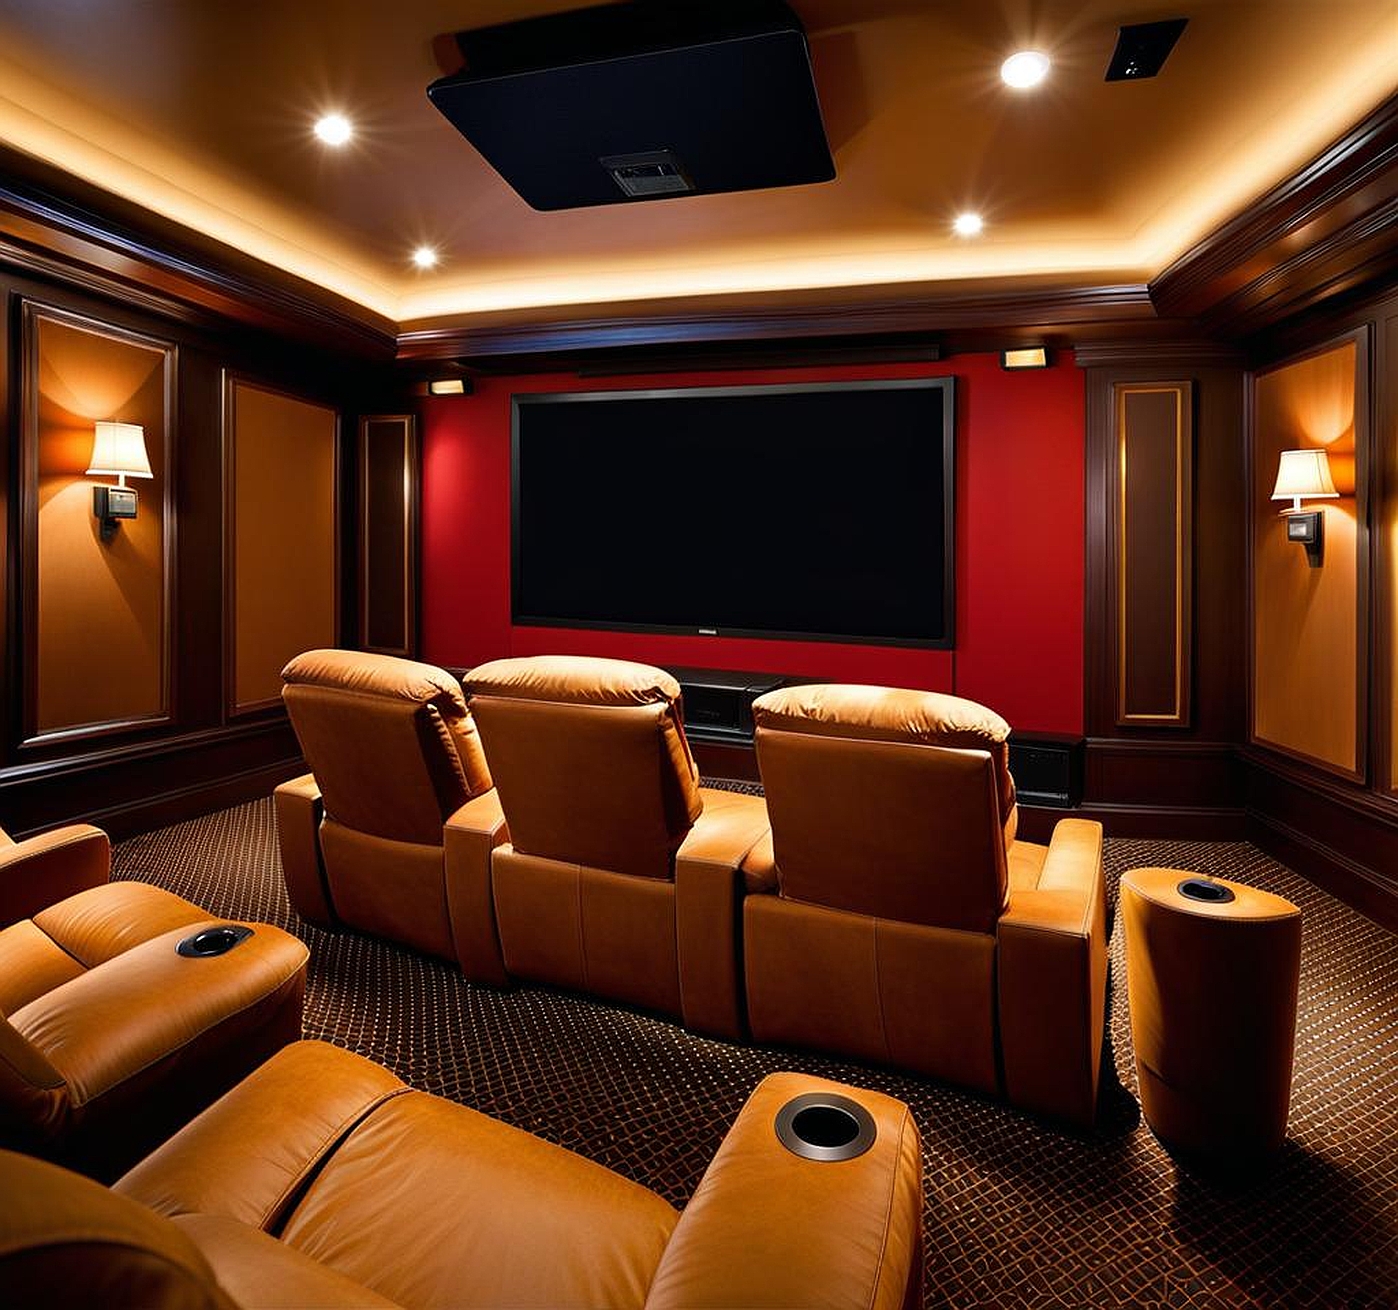 DIY Small Home Theater Seating Ideas for a One-of-a-Kind Setup